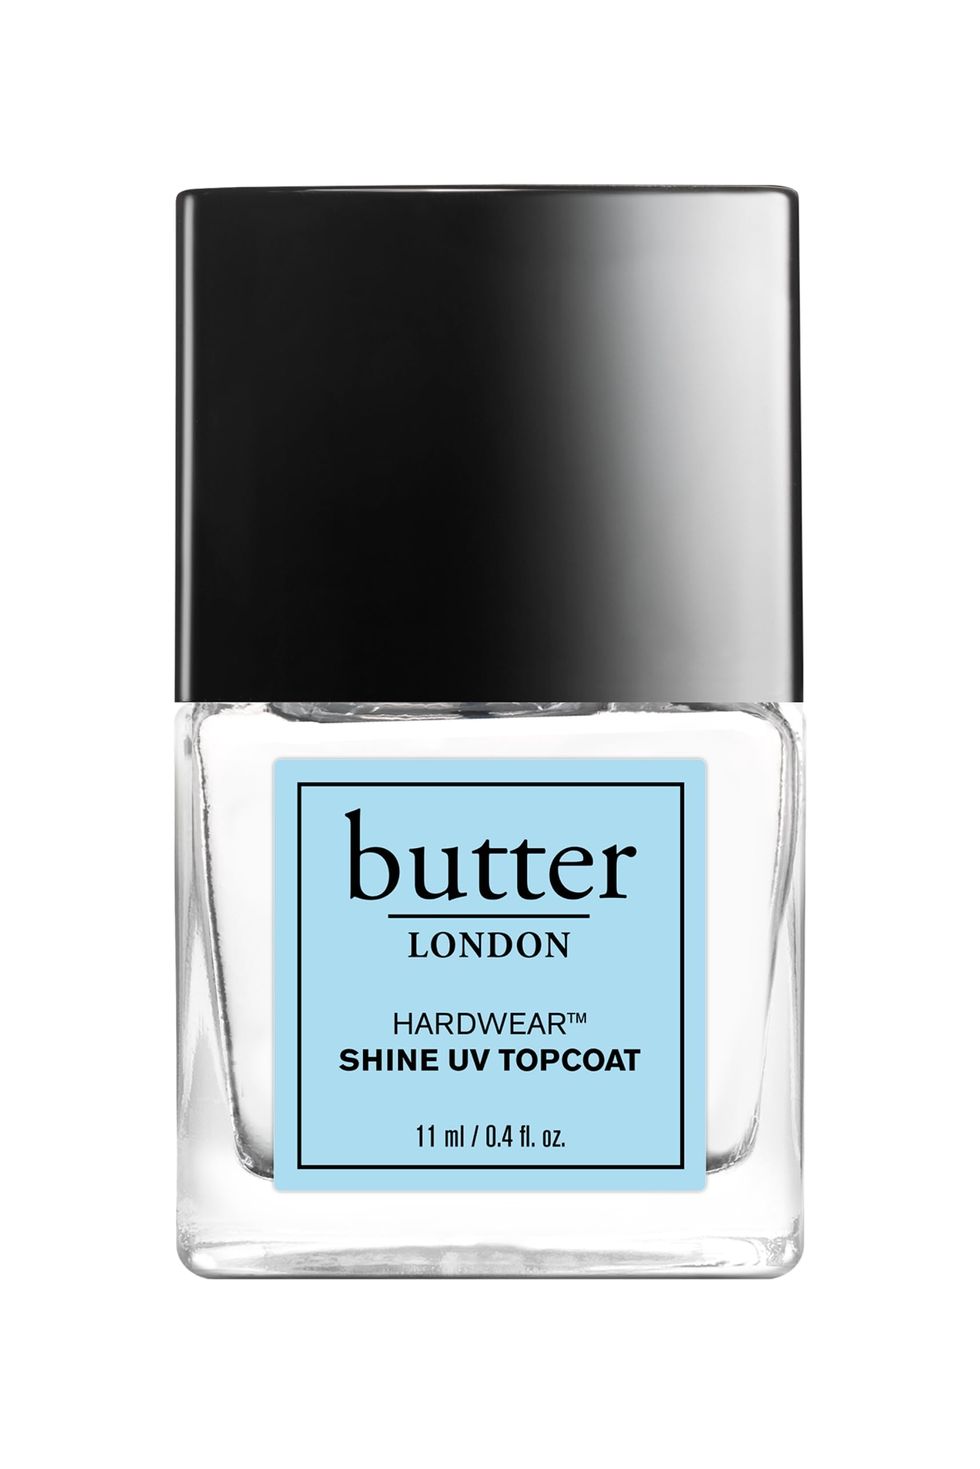 The 12 Best Top Coat Nail Polish of 2023